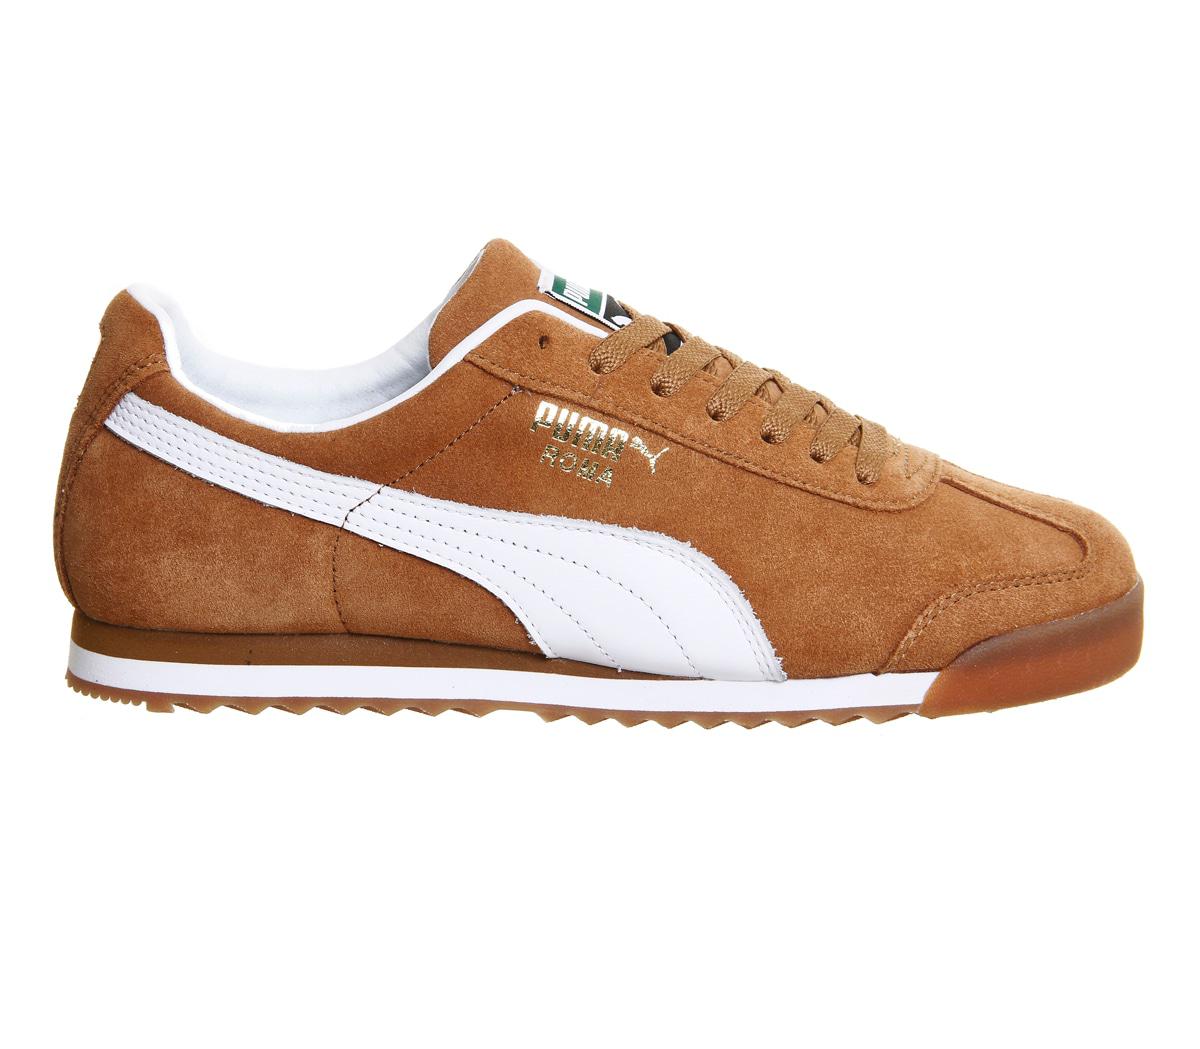 PUMA Suede Roma in Chestnut (Brown) for Men - Lyst